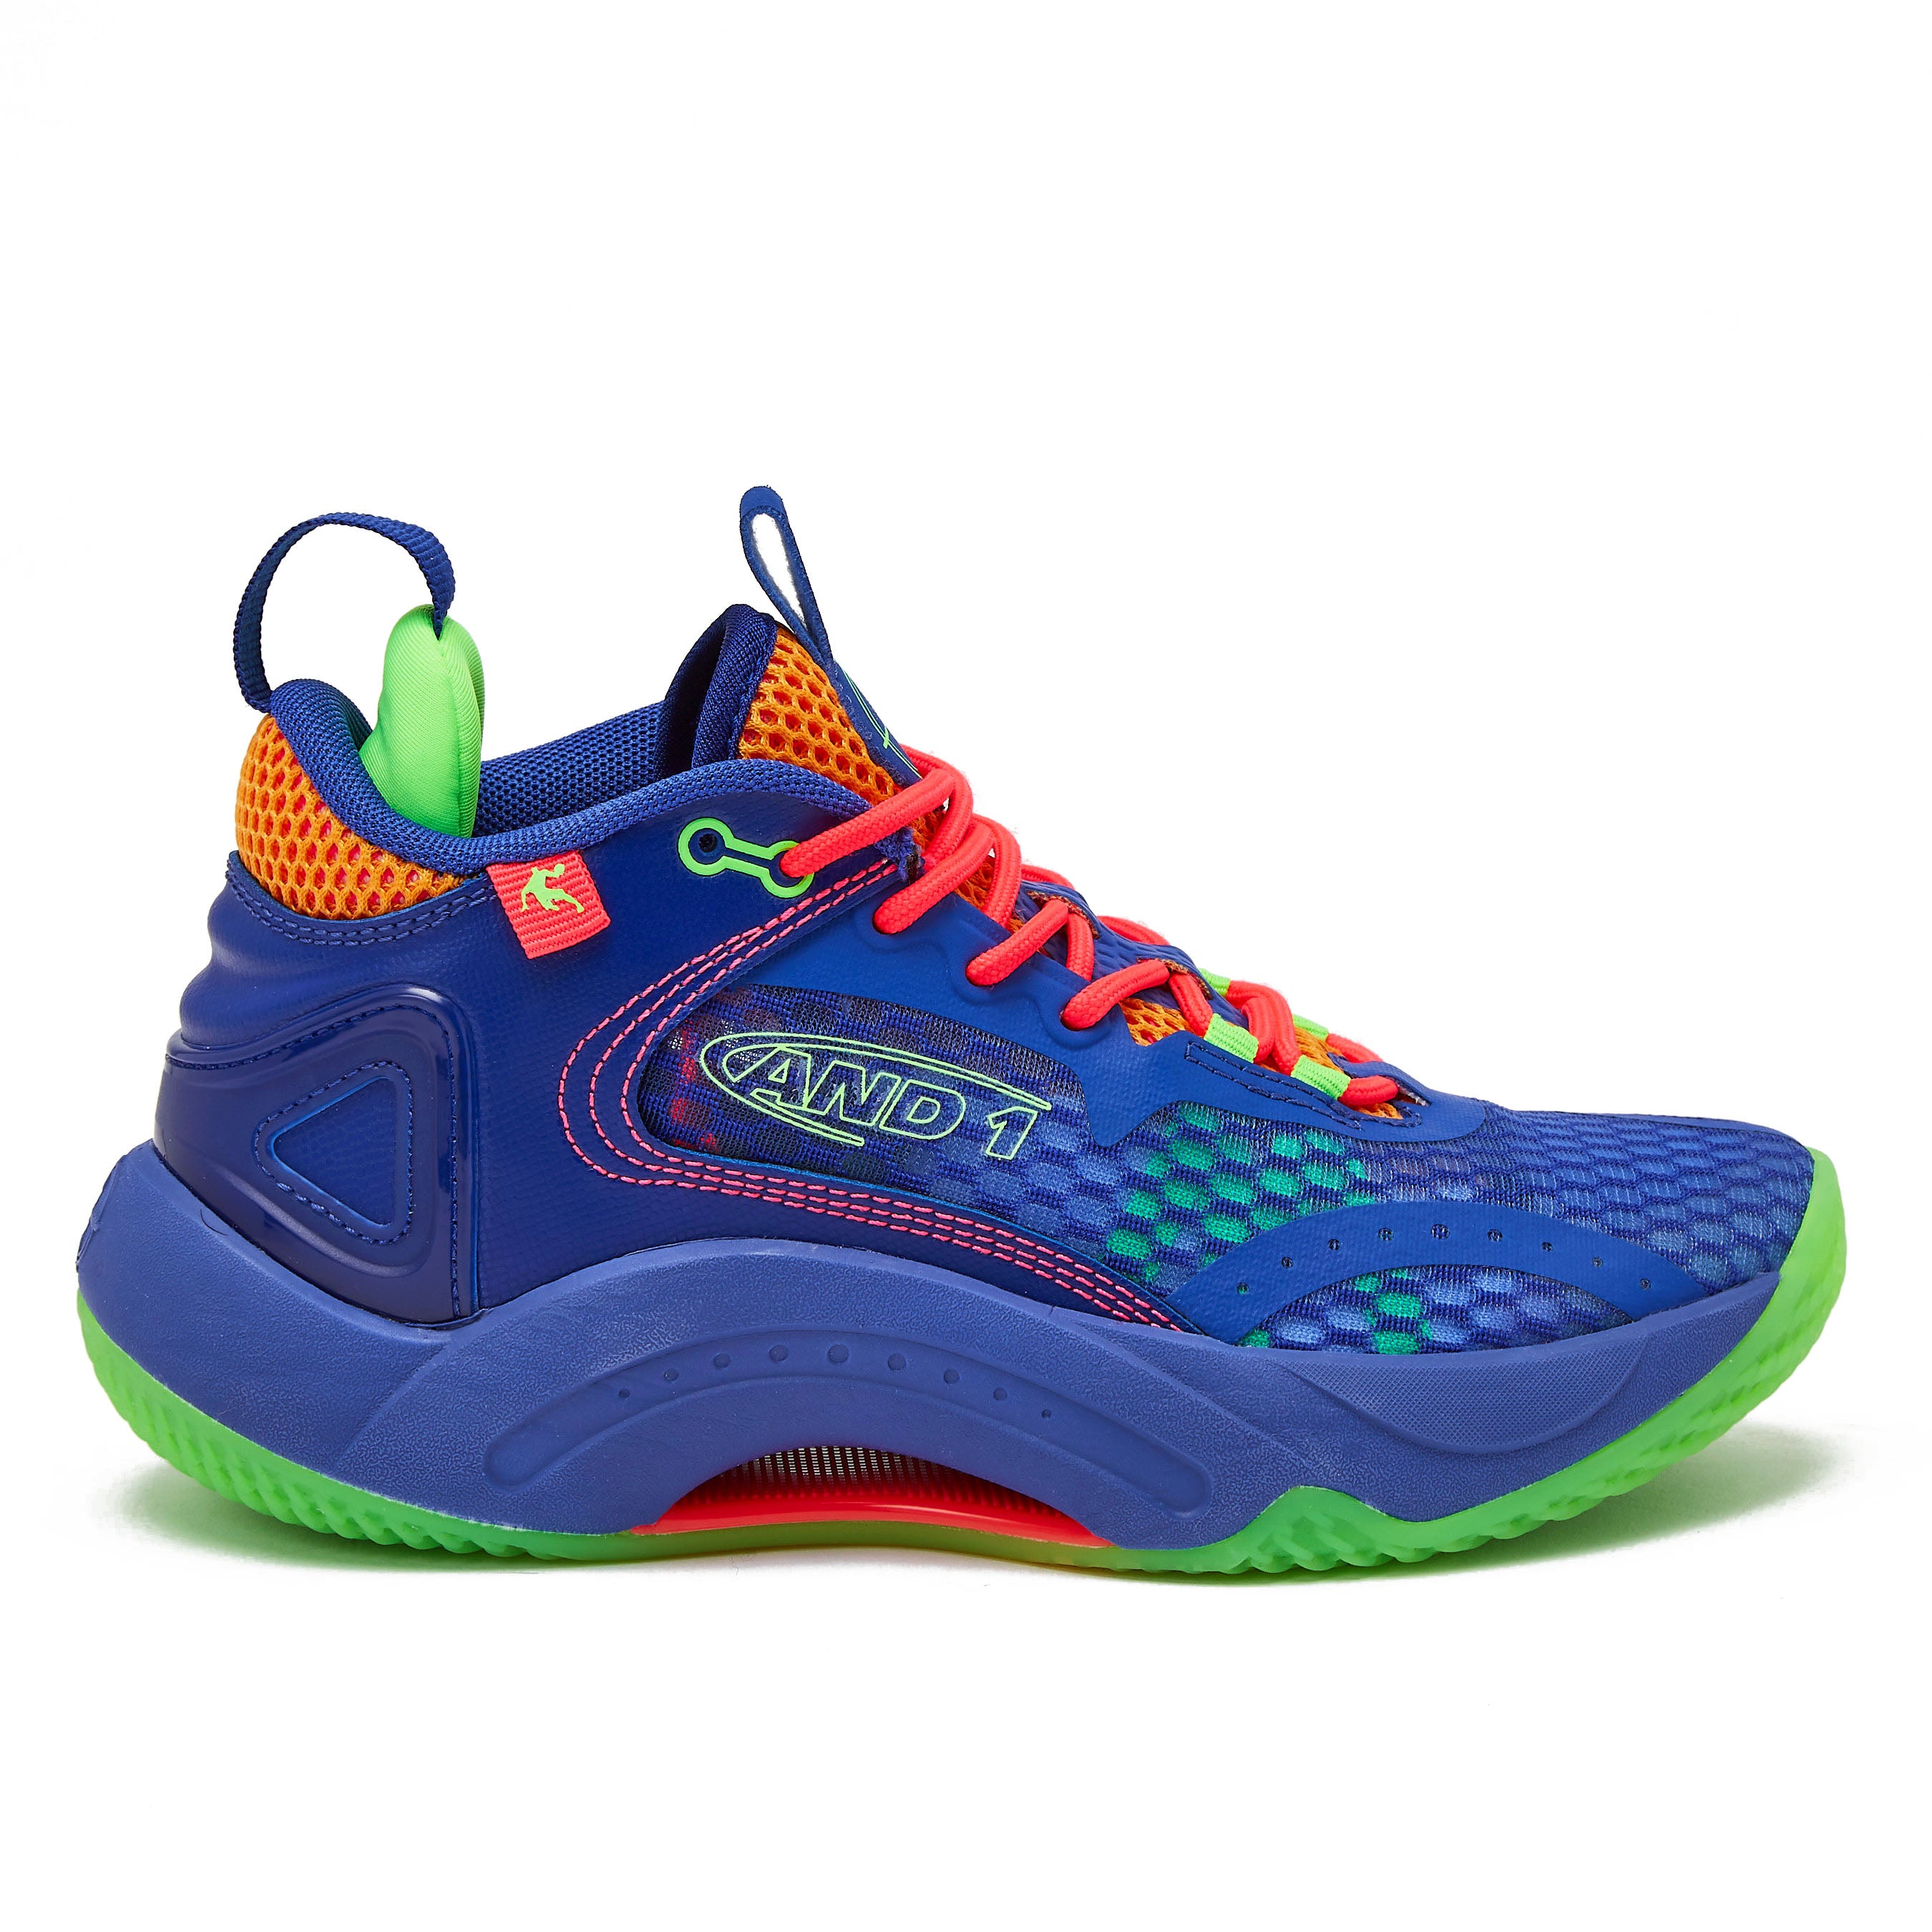 AND1 Boys Basketball Shoes & Sneakers | Little Kids and Big Kids